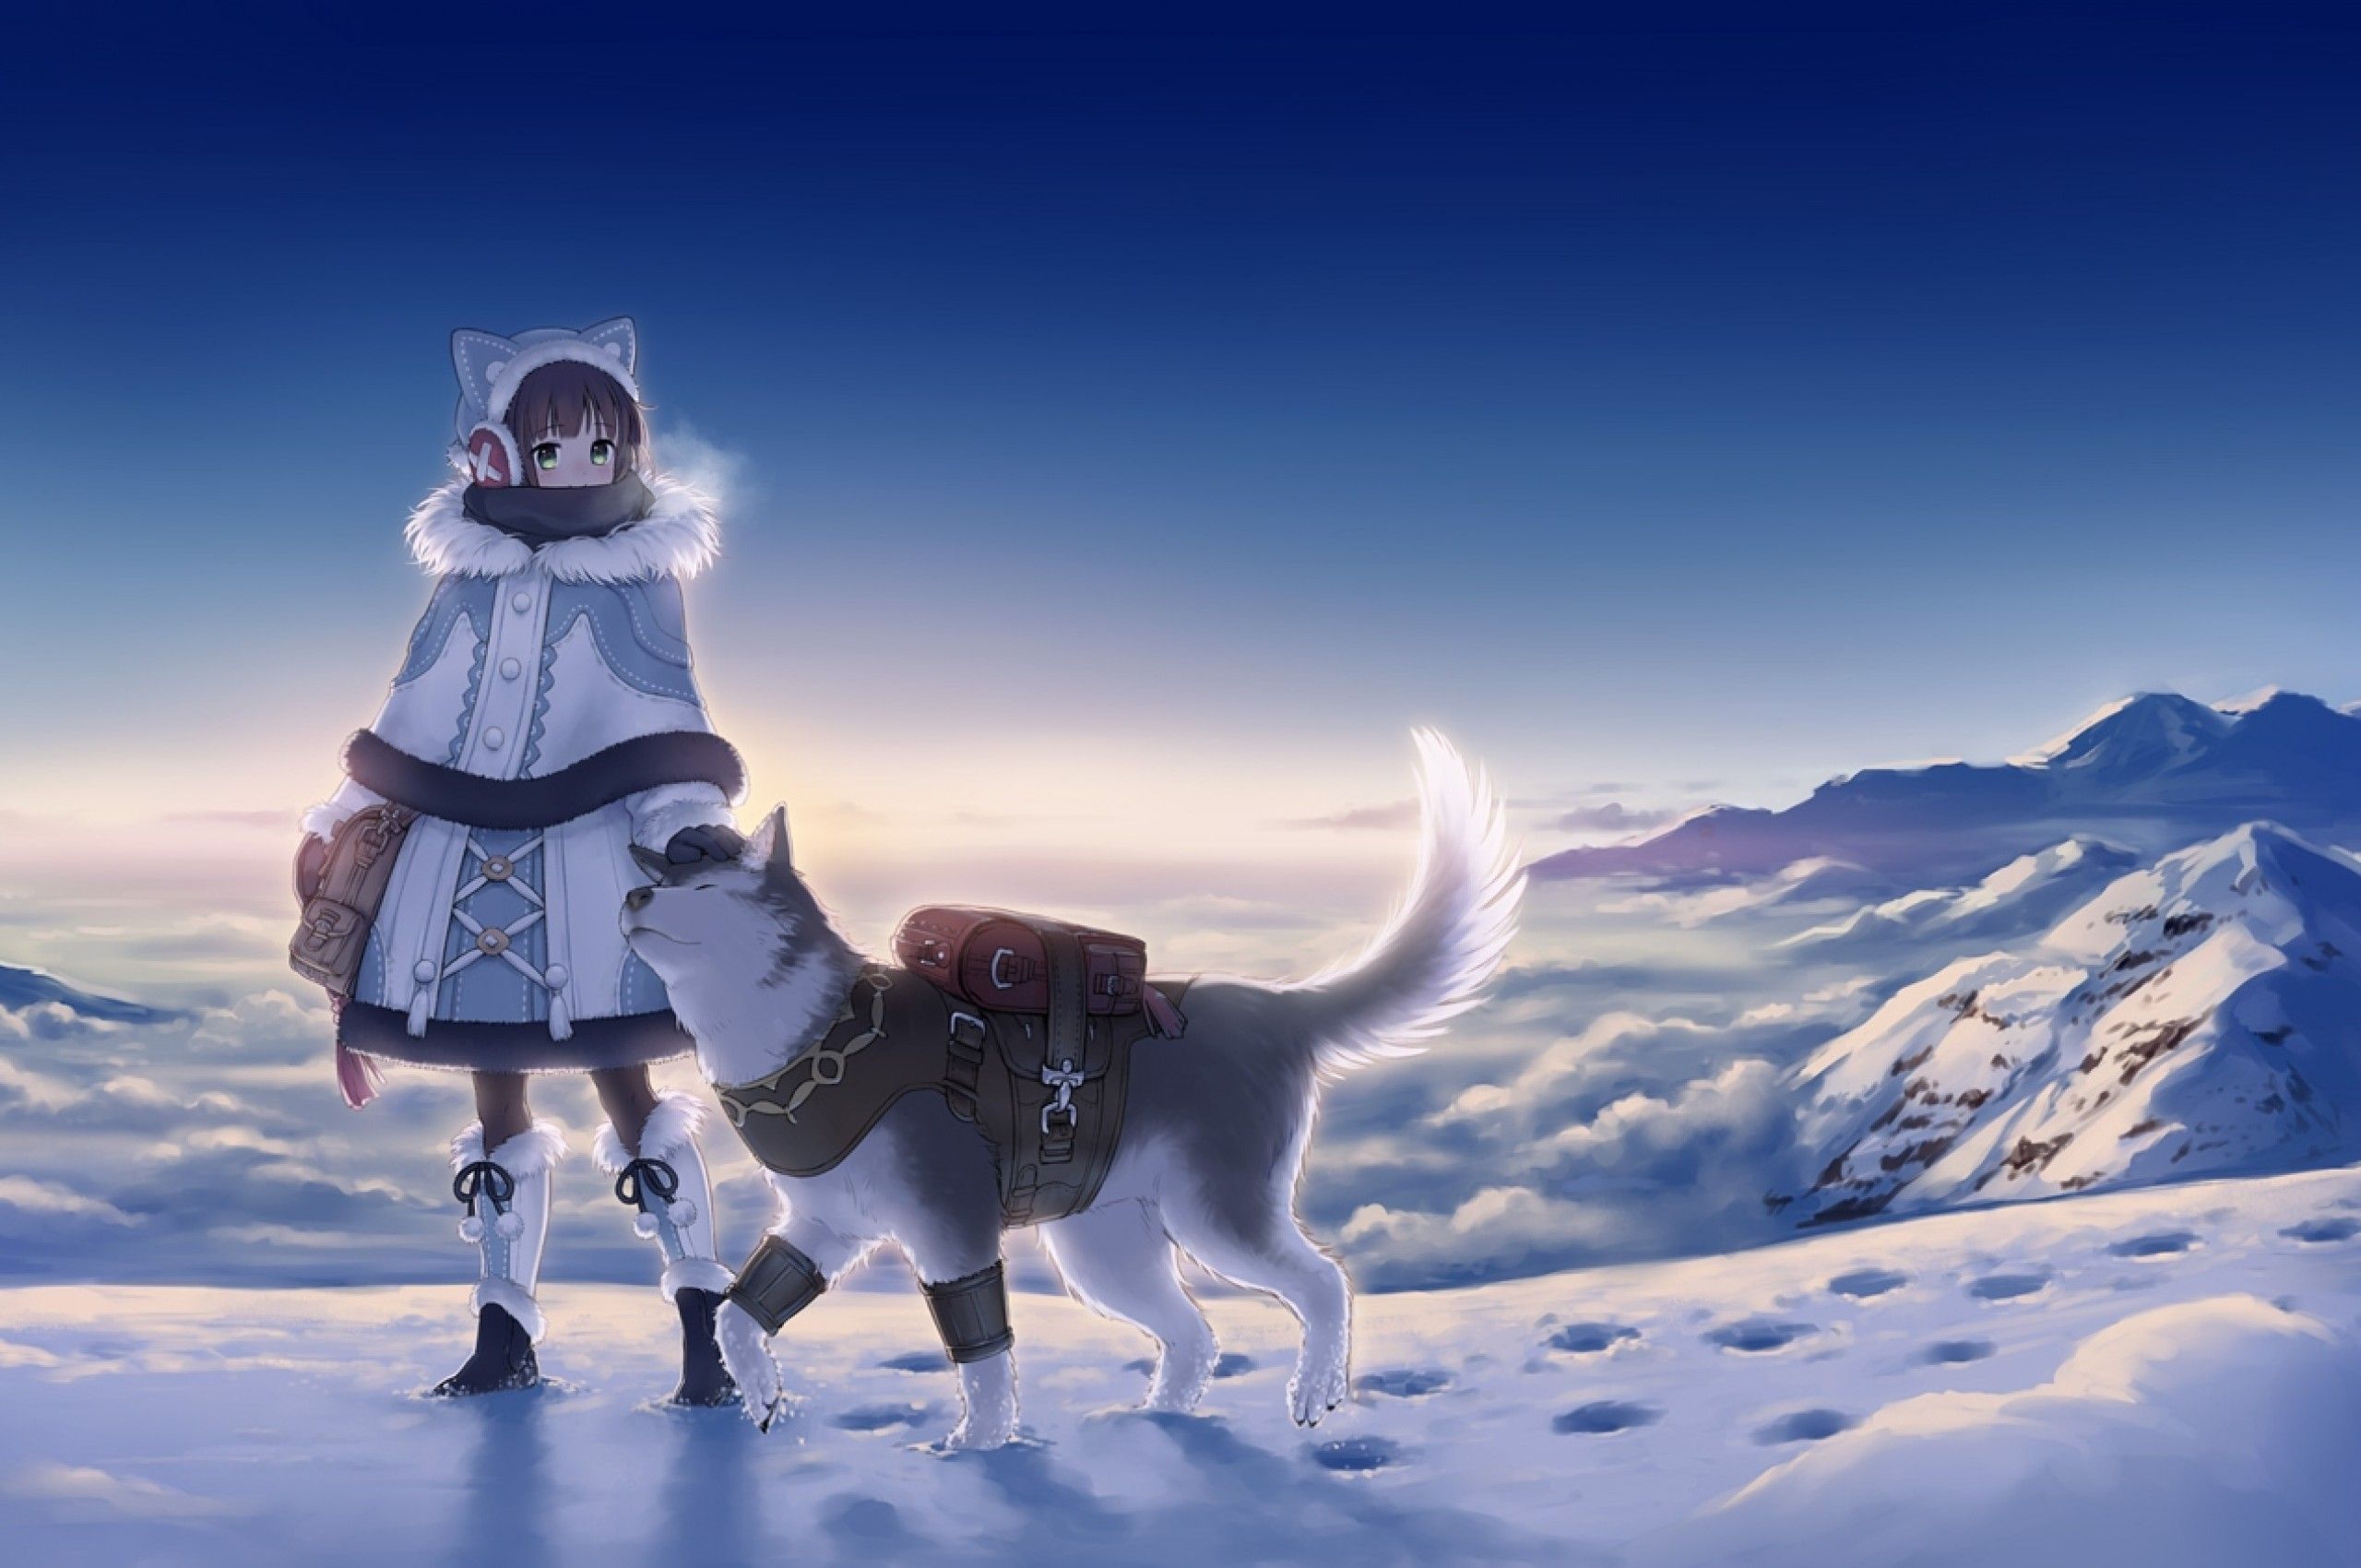 Download 2560x1700 Anime Girl, Winter, Wolf, Snow, Landscape, Clean Sky Wallpaper for Chromebook Pixel